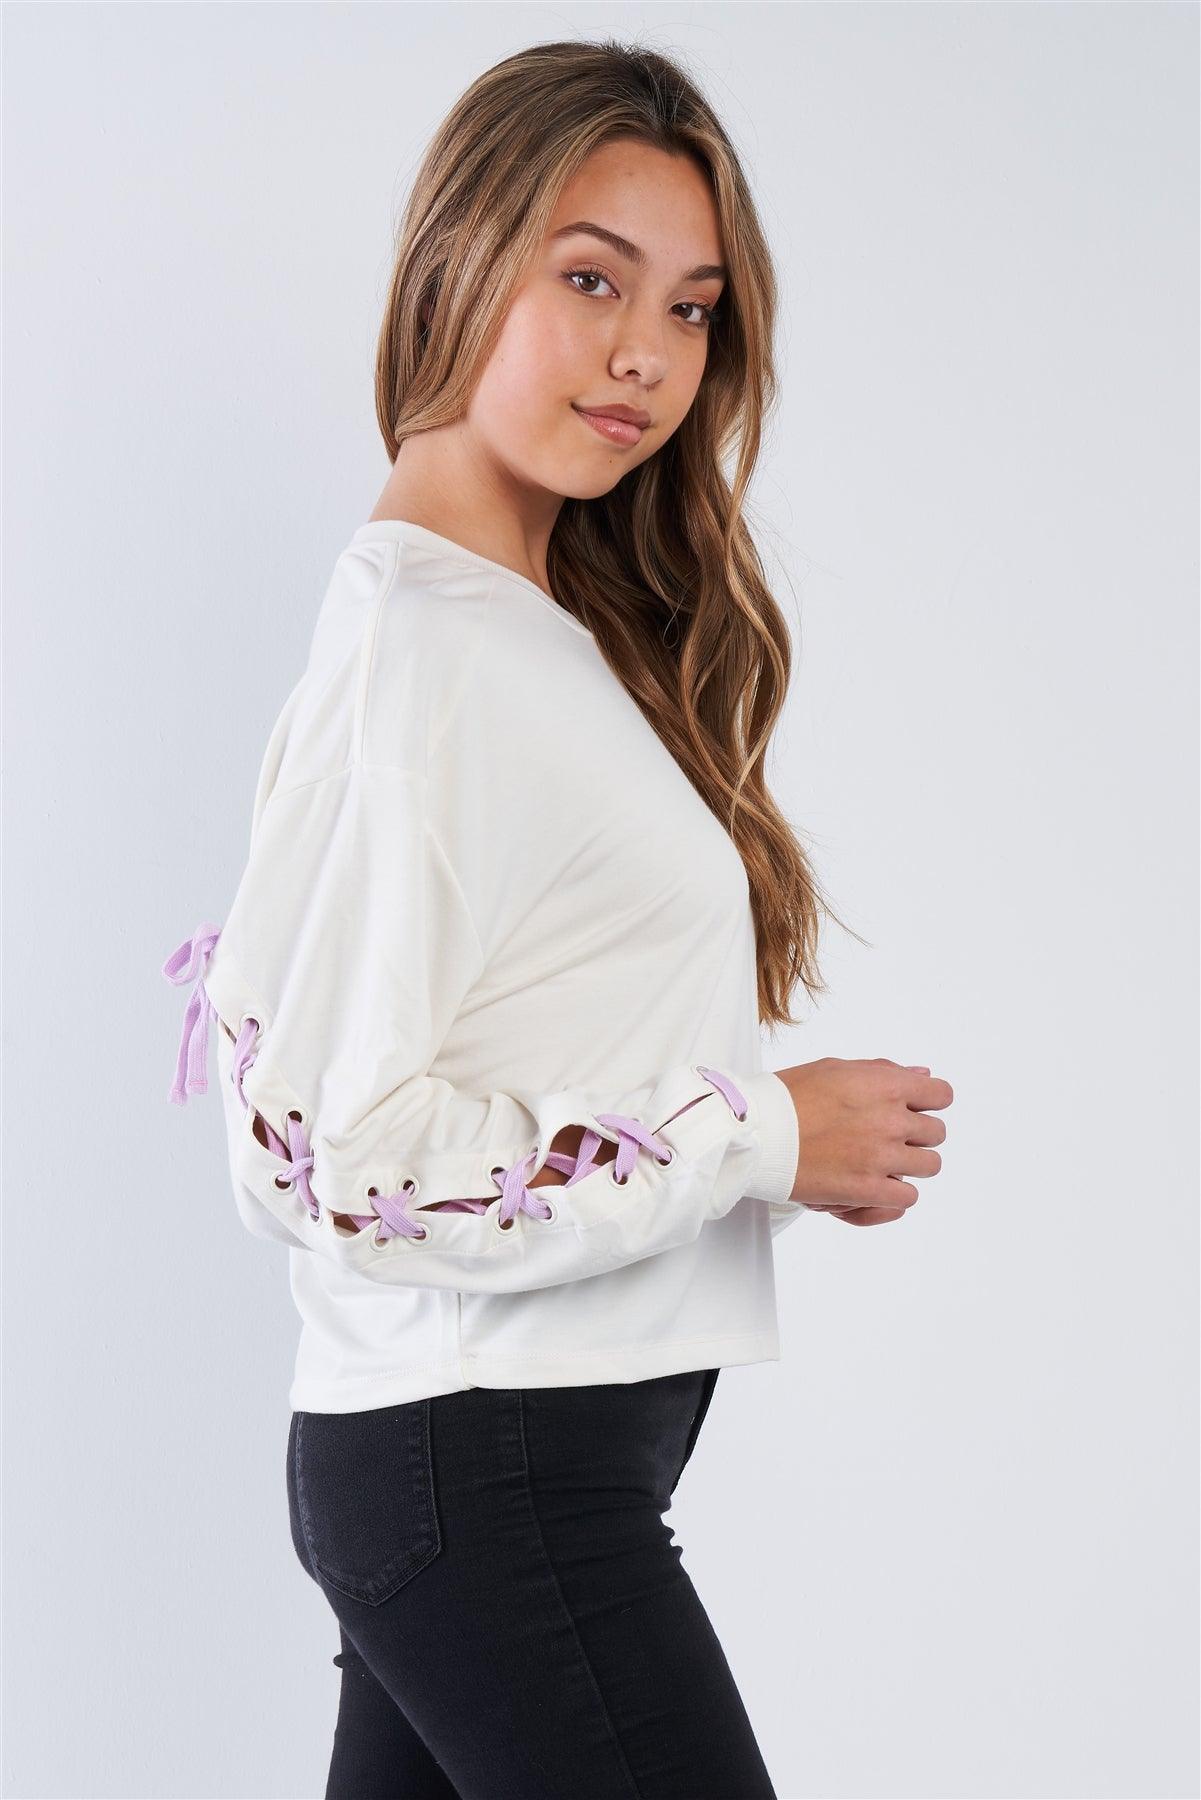 Pristine Long Sleeve "GRL POWER" Lace-Up Sleeve Pullover Top